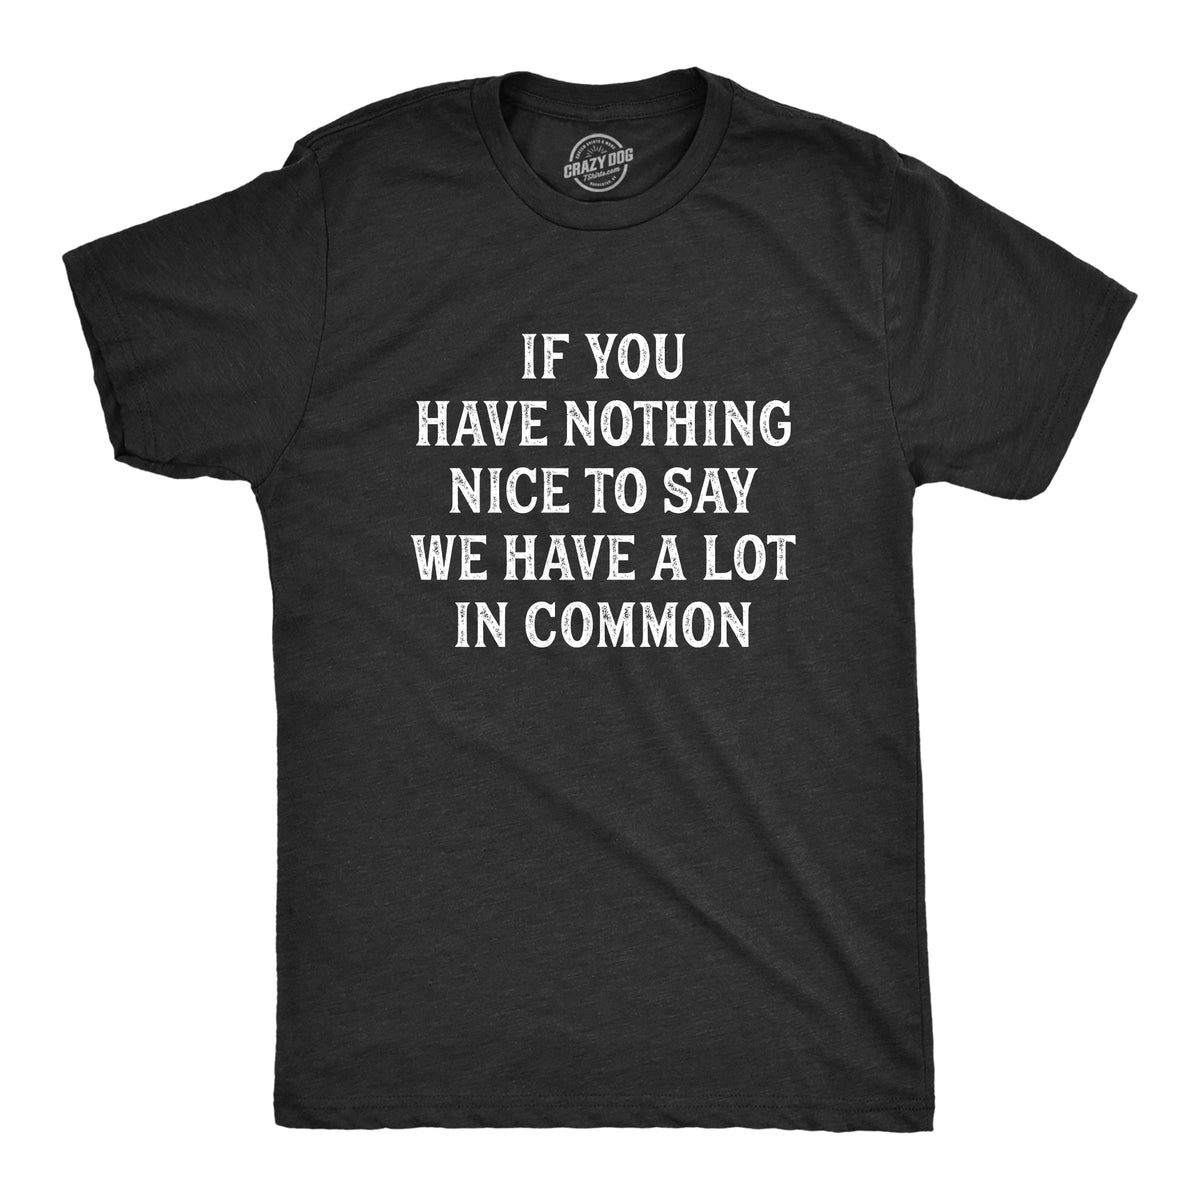 Funny Heather Black - COMMON If You Have Nothing Nice To Say We Have A Lot In Common Mens T Shirt Nerdy sarcastic Tee